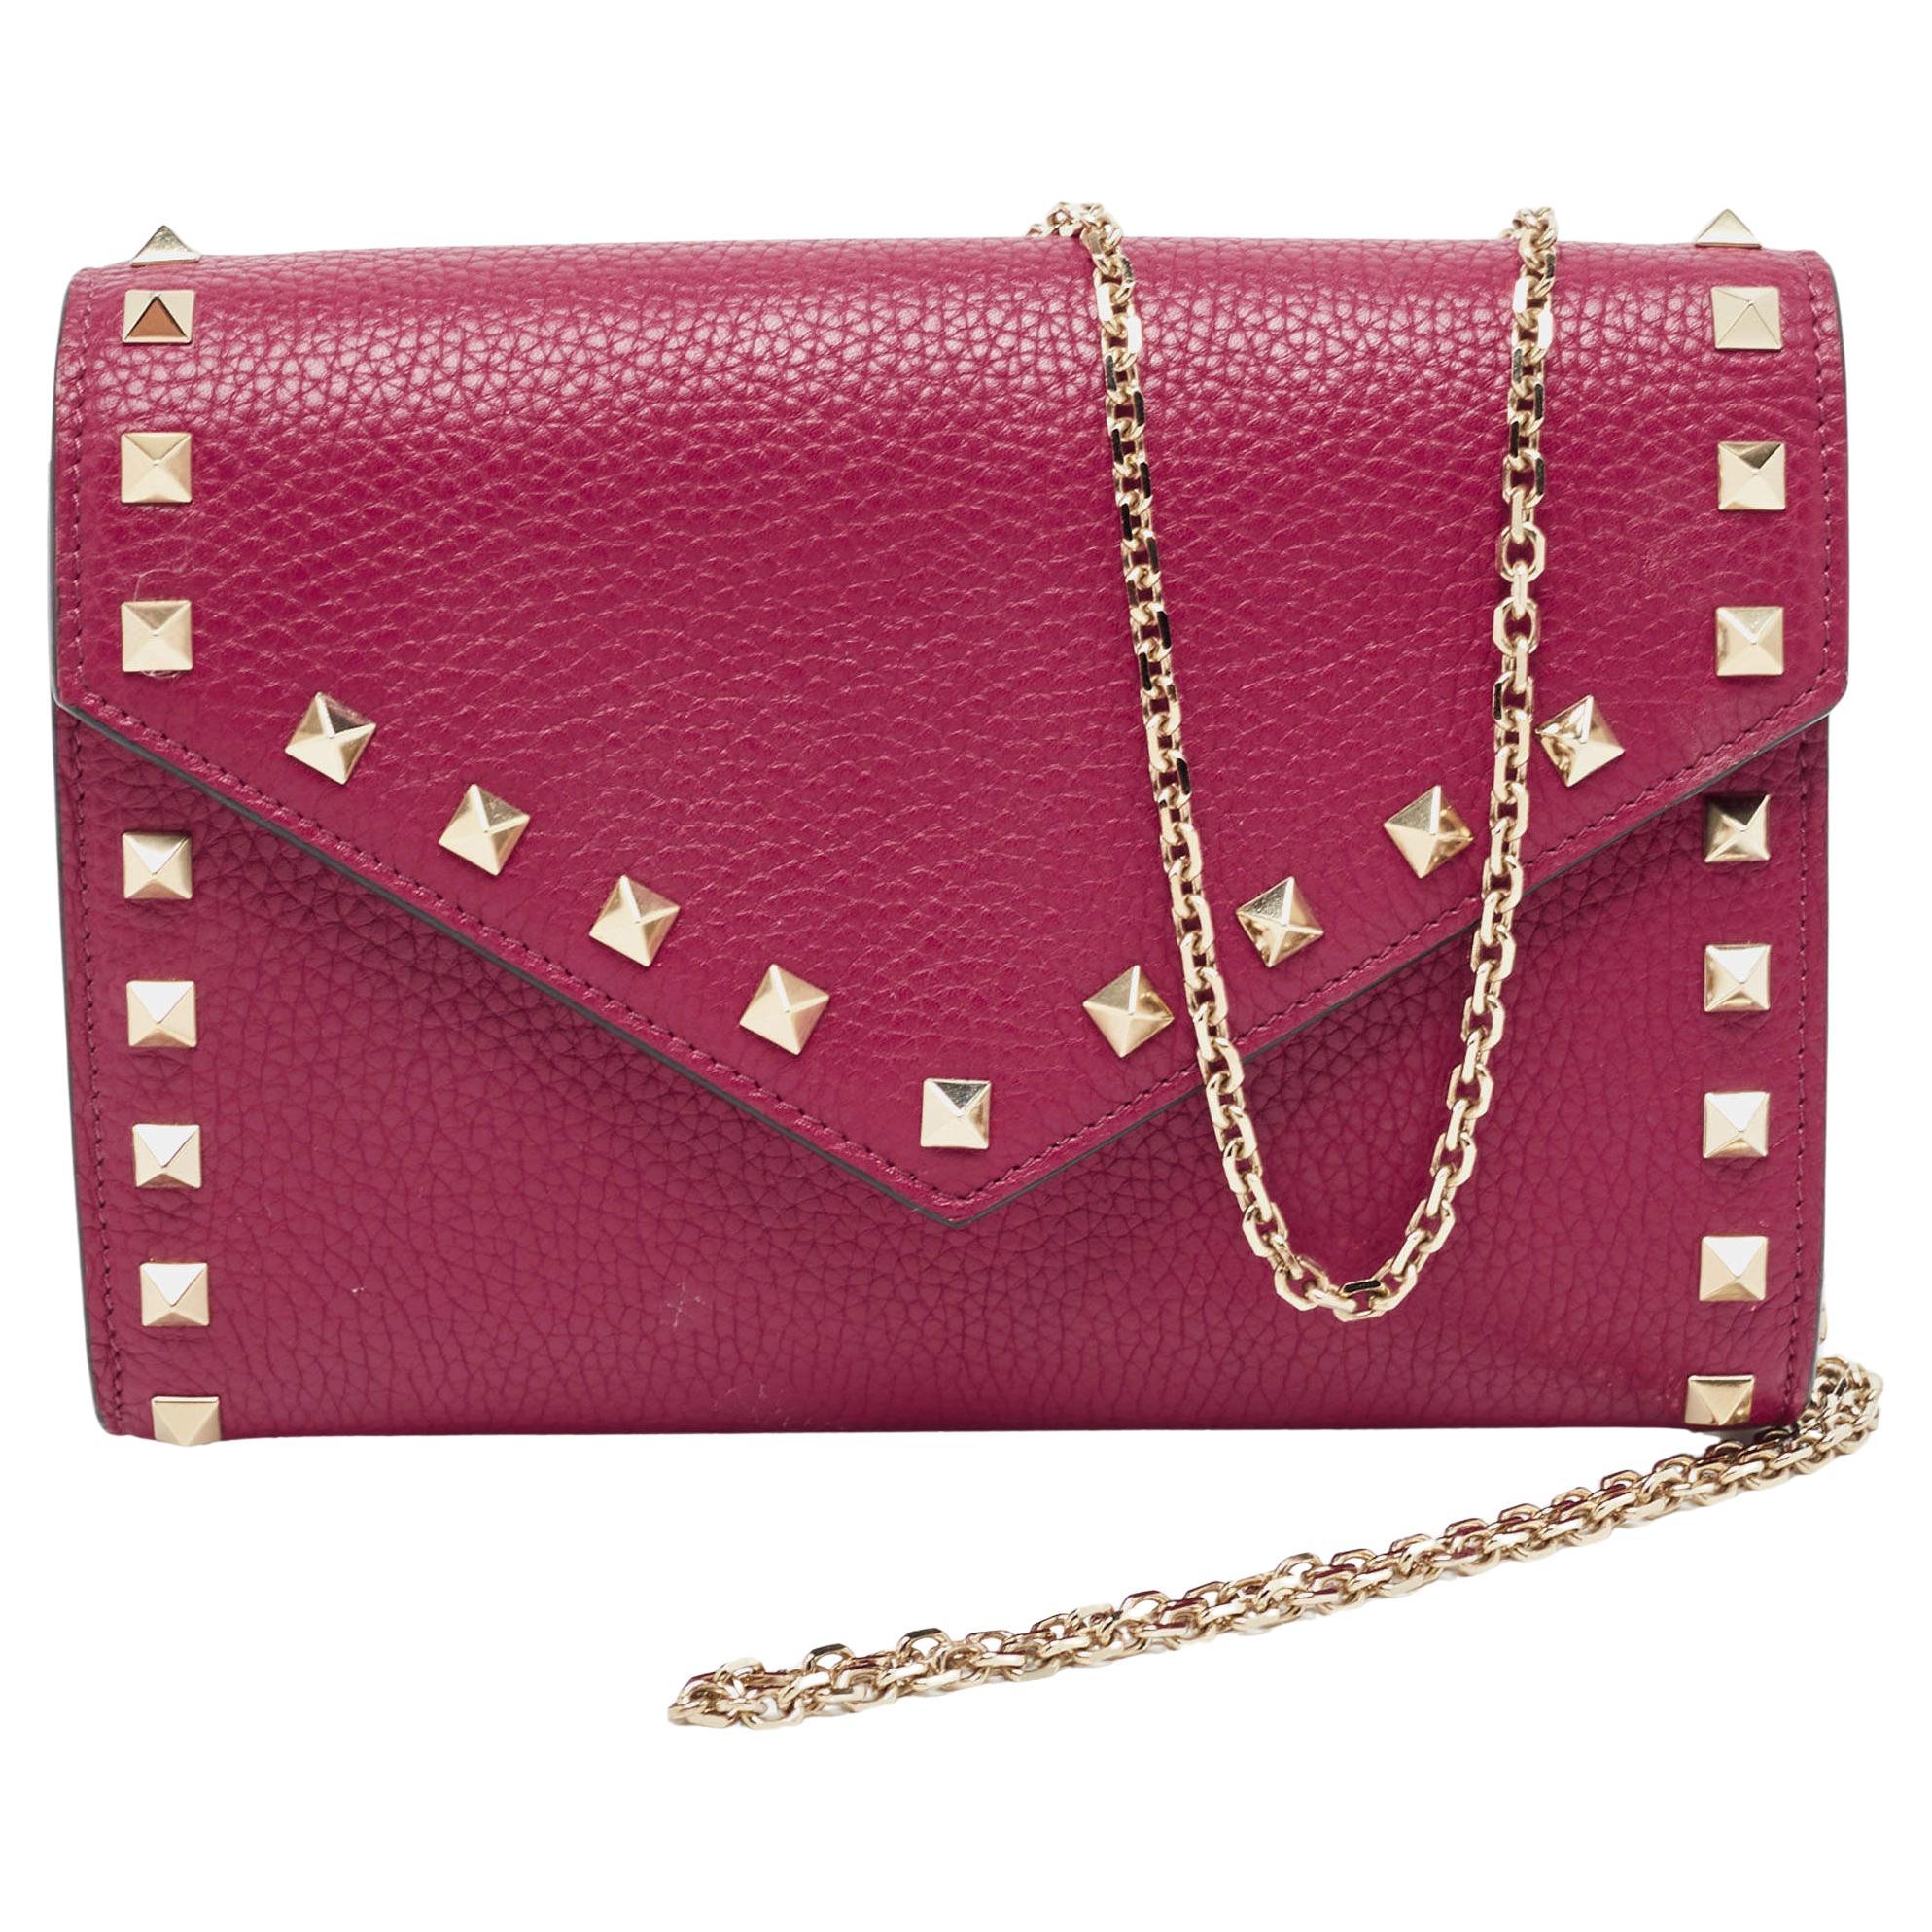 Valentino Pink Leather Rockstud Envelope Wallet on Chain